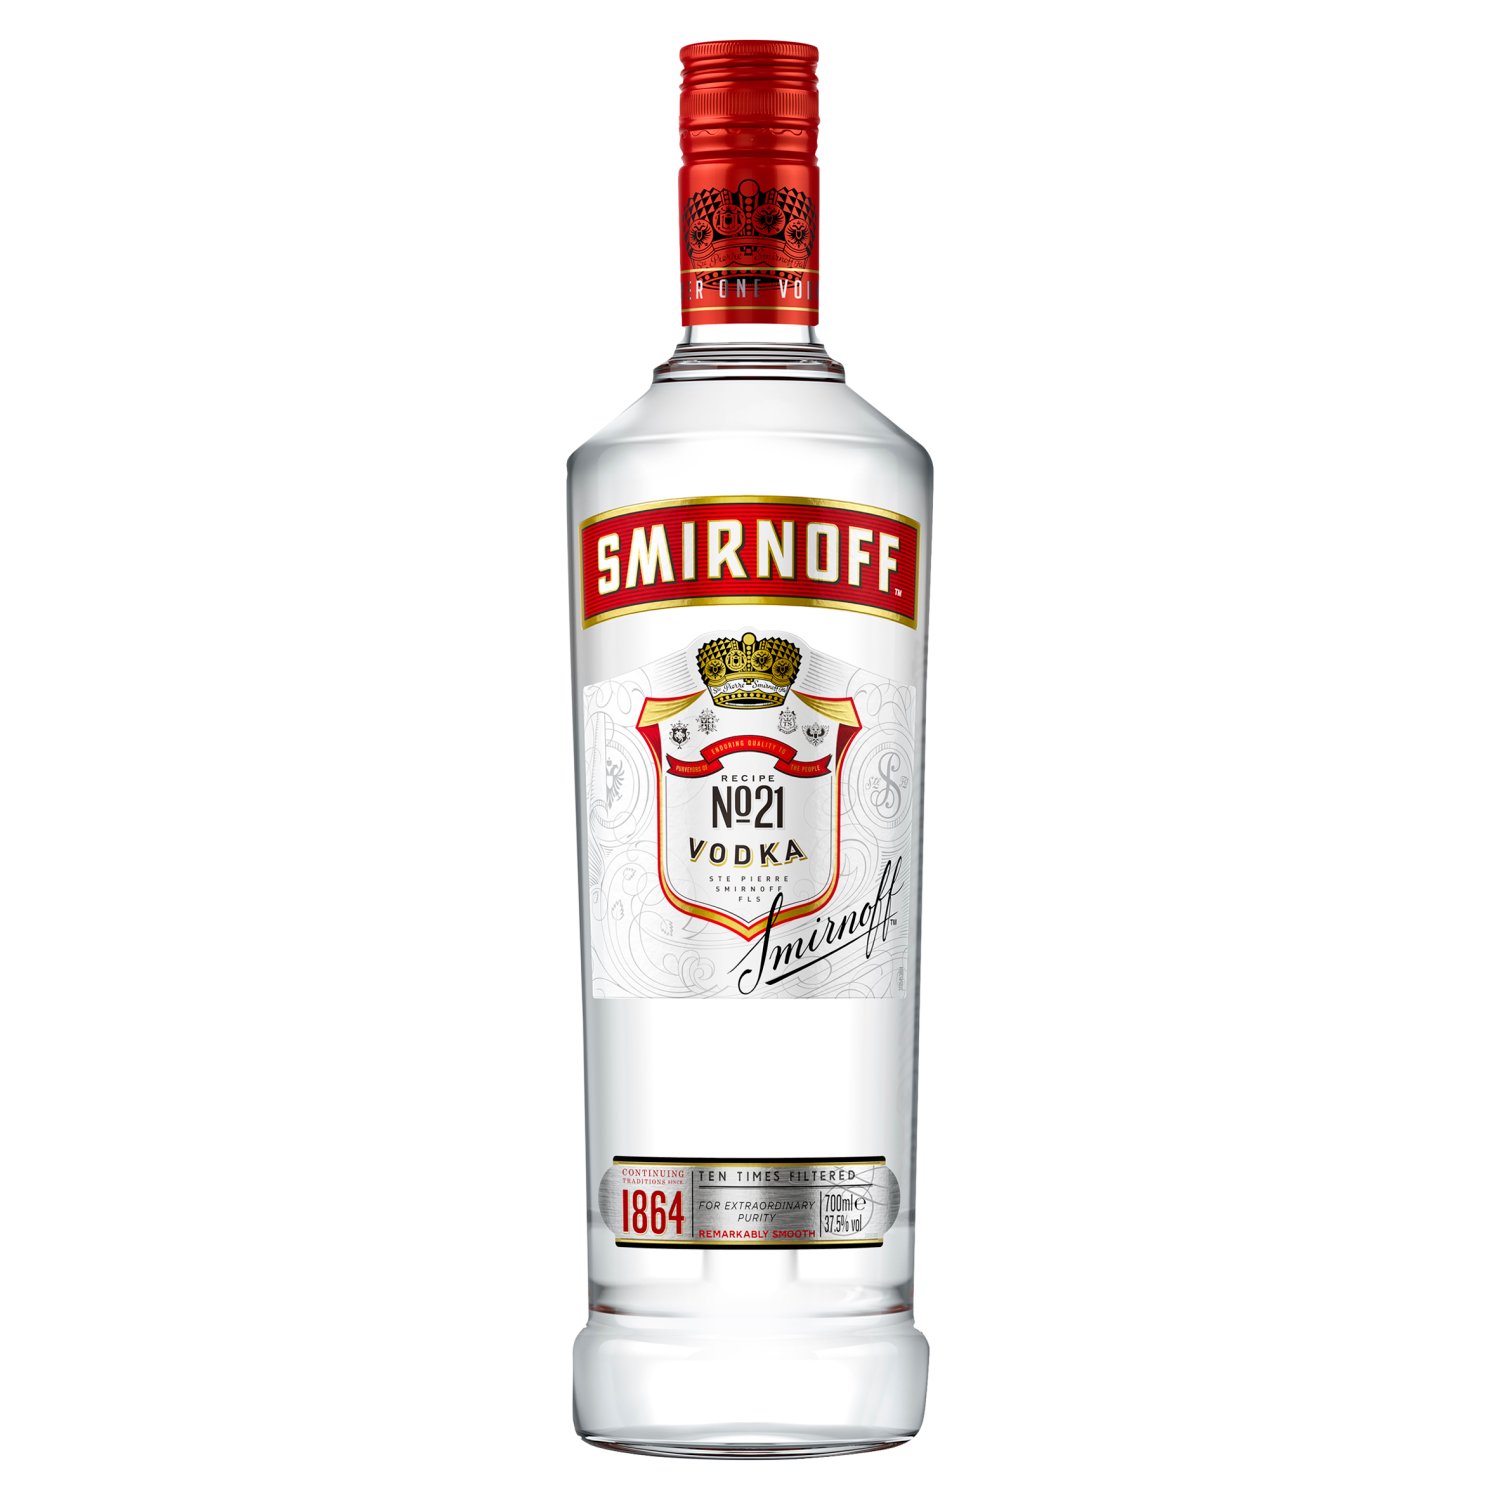 Since 1864 Smirnoff has travelled from Russia to Poland, Paris to the world, using our multiple column filtration method to make award-winning, smooth-tasting vodka for everyone.